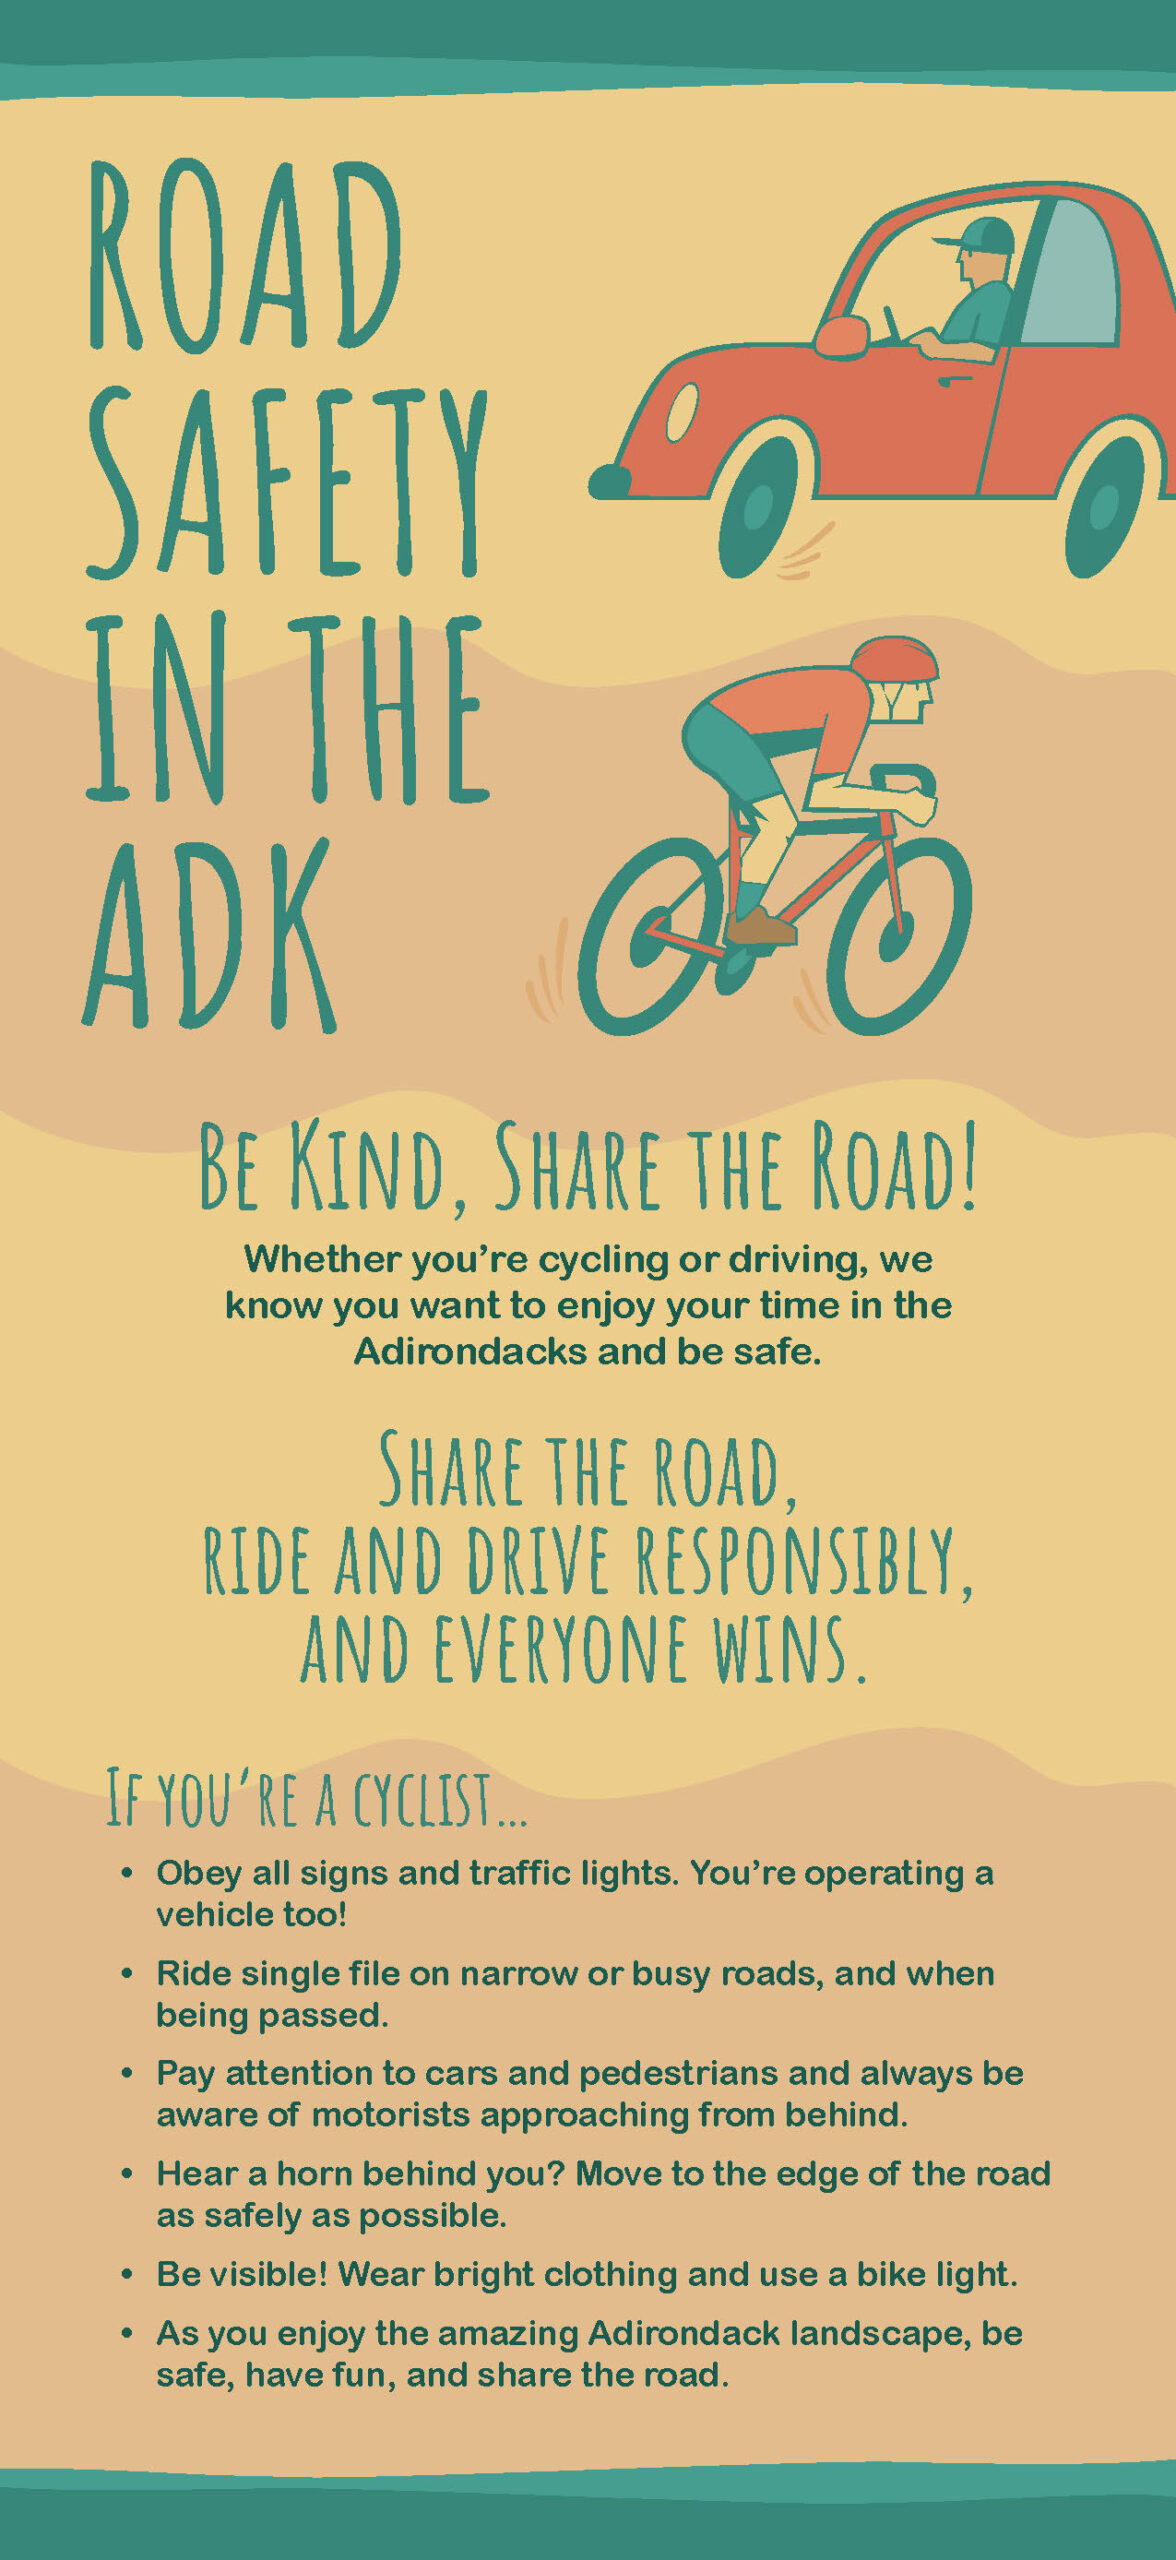 Share the road if you are cyclist